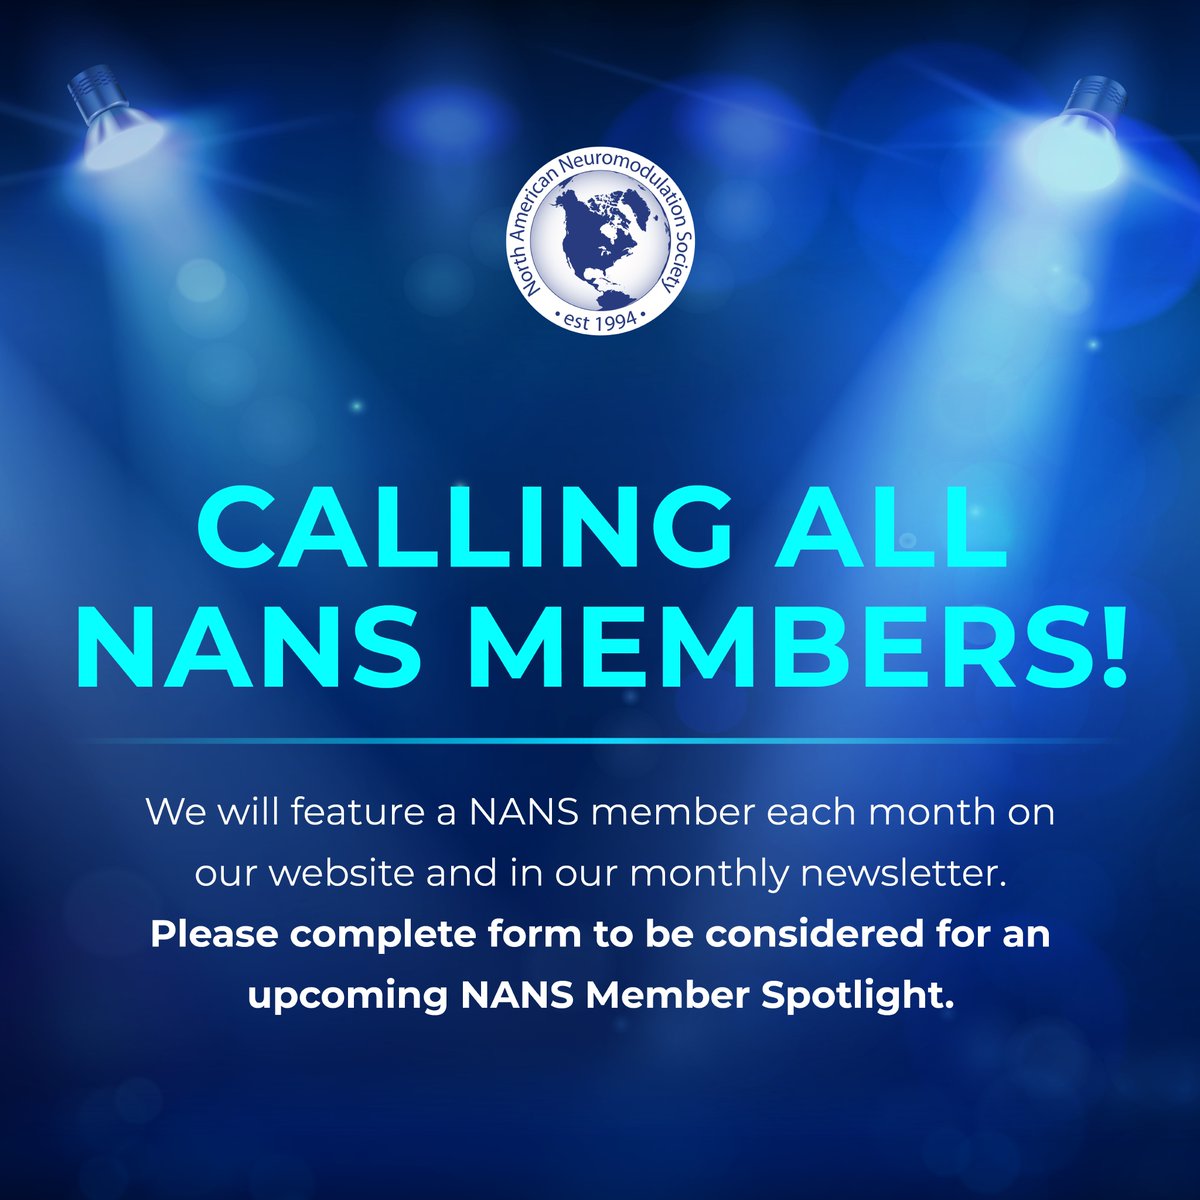 Member Spotlight! Beginning in July, each month #NANS will feature a NANS member on its website and monthly email newsletter. Please complete the form below to be considered for a member profile! Complete the form here: surveymonkey.com/r/mbrspot